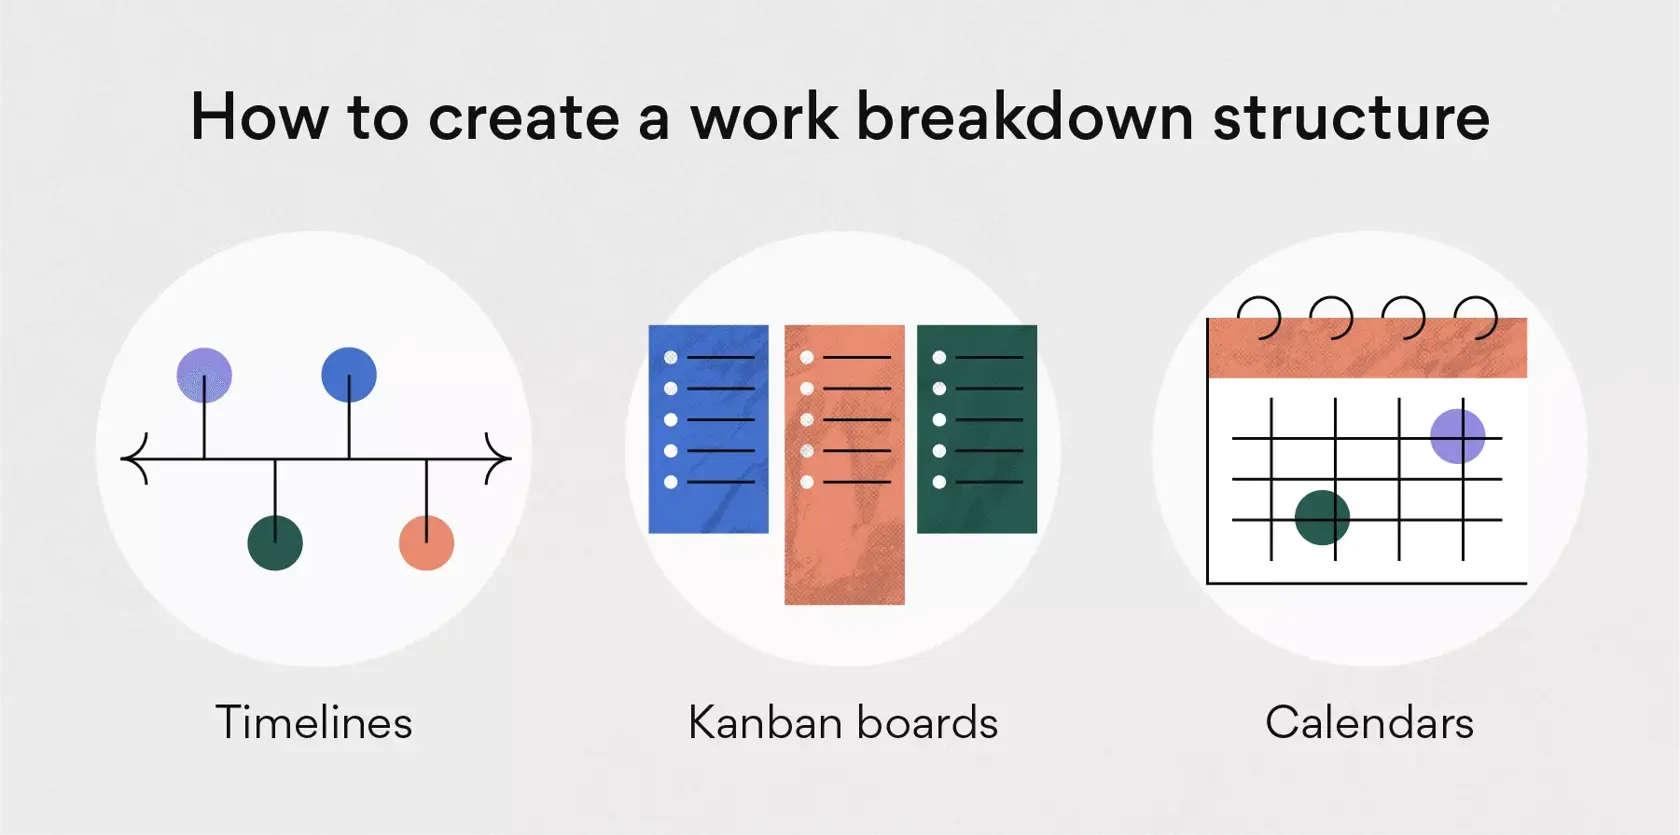 How to create a work breakdown structure